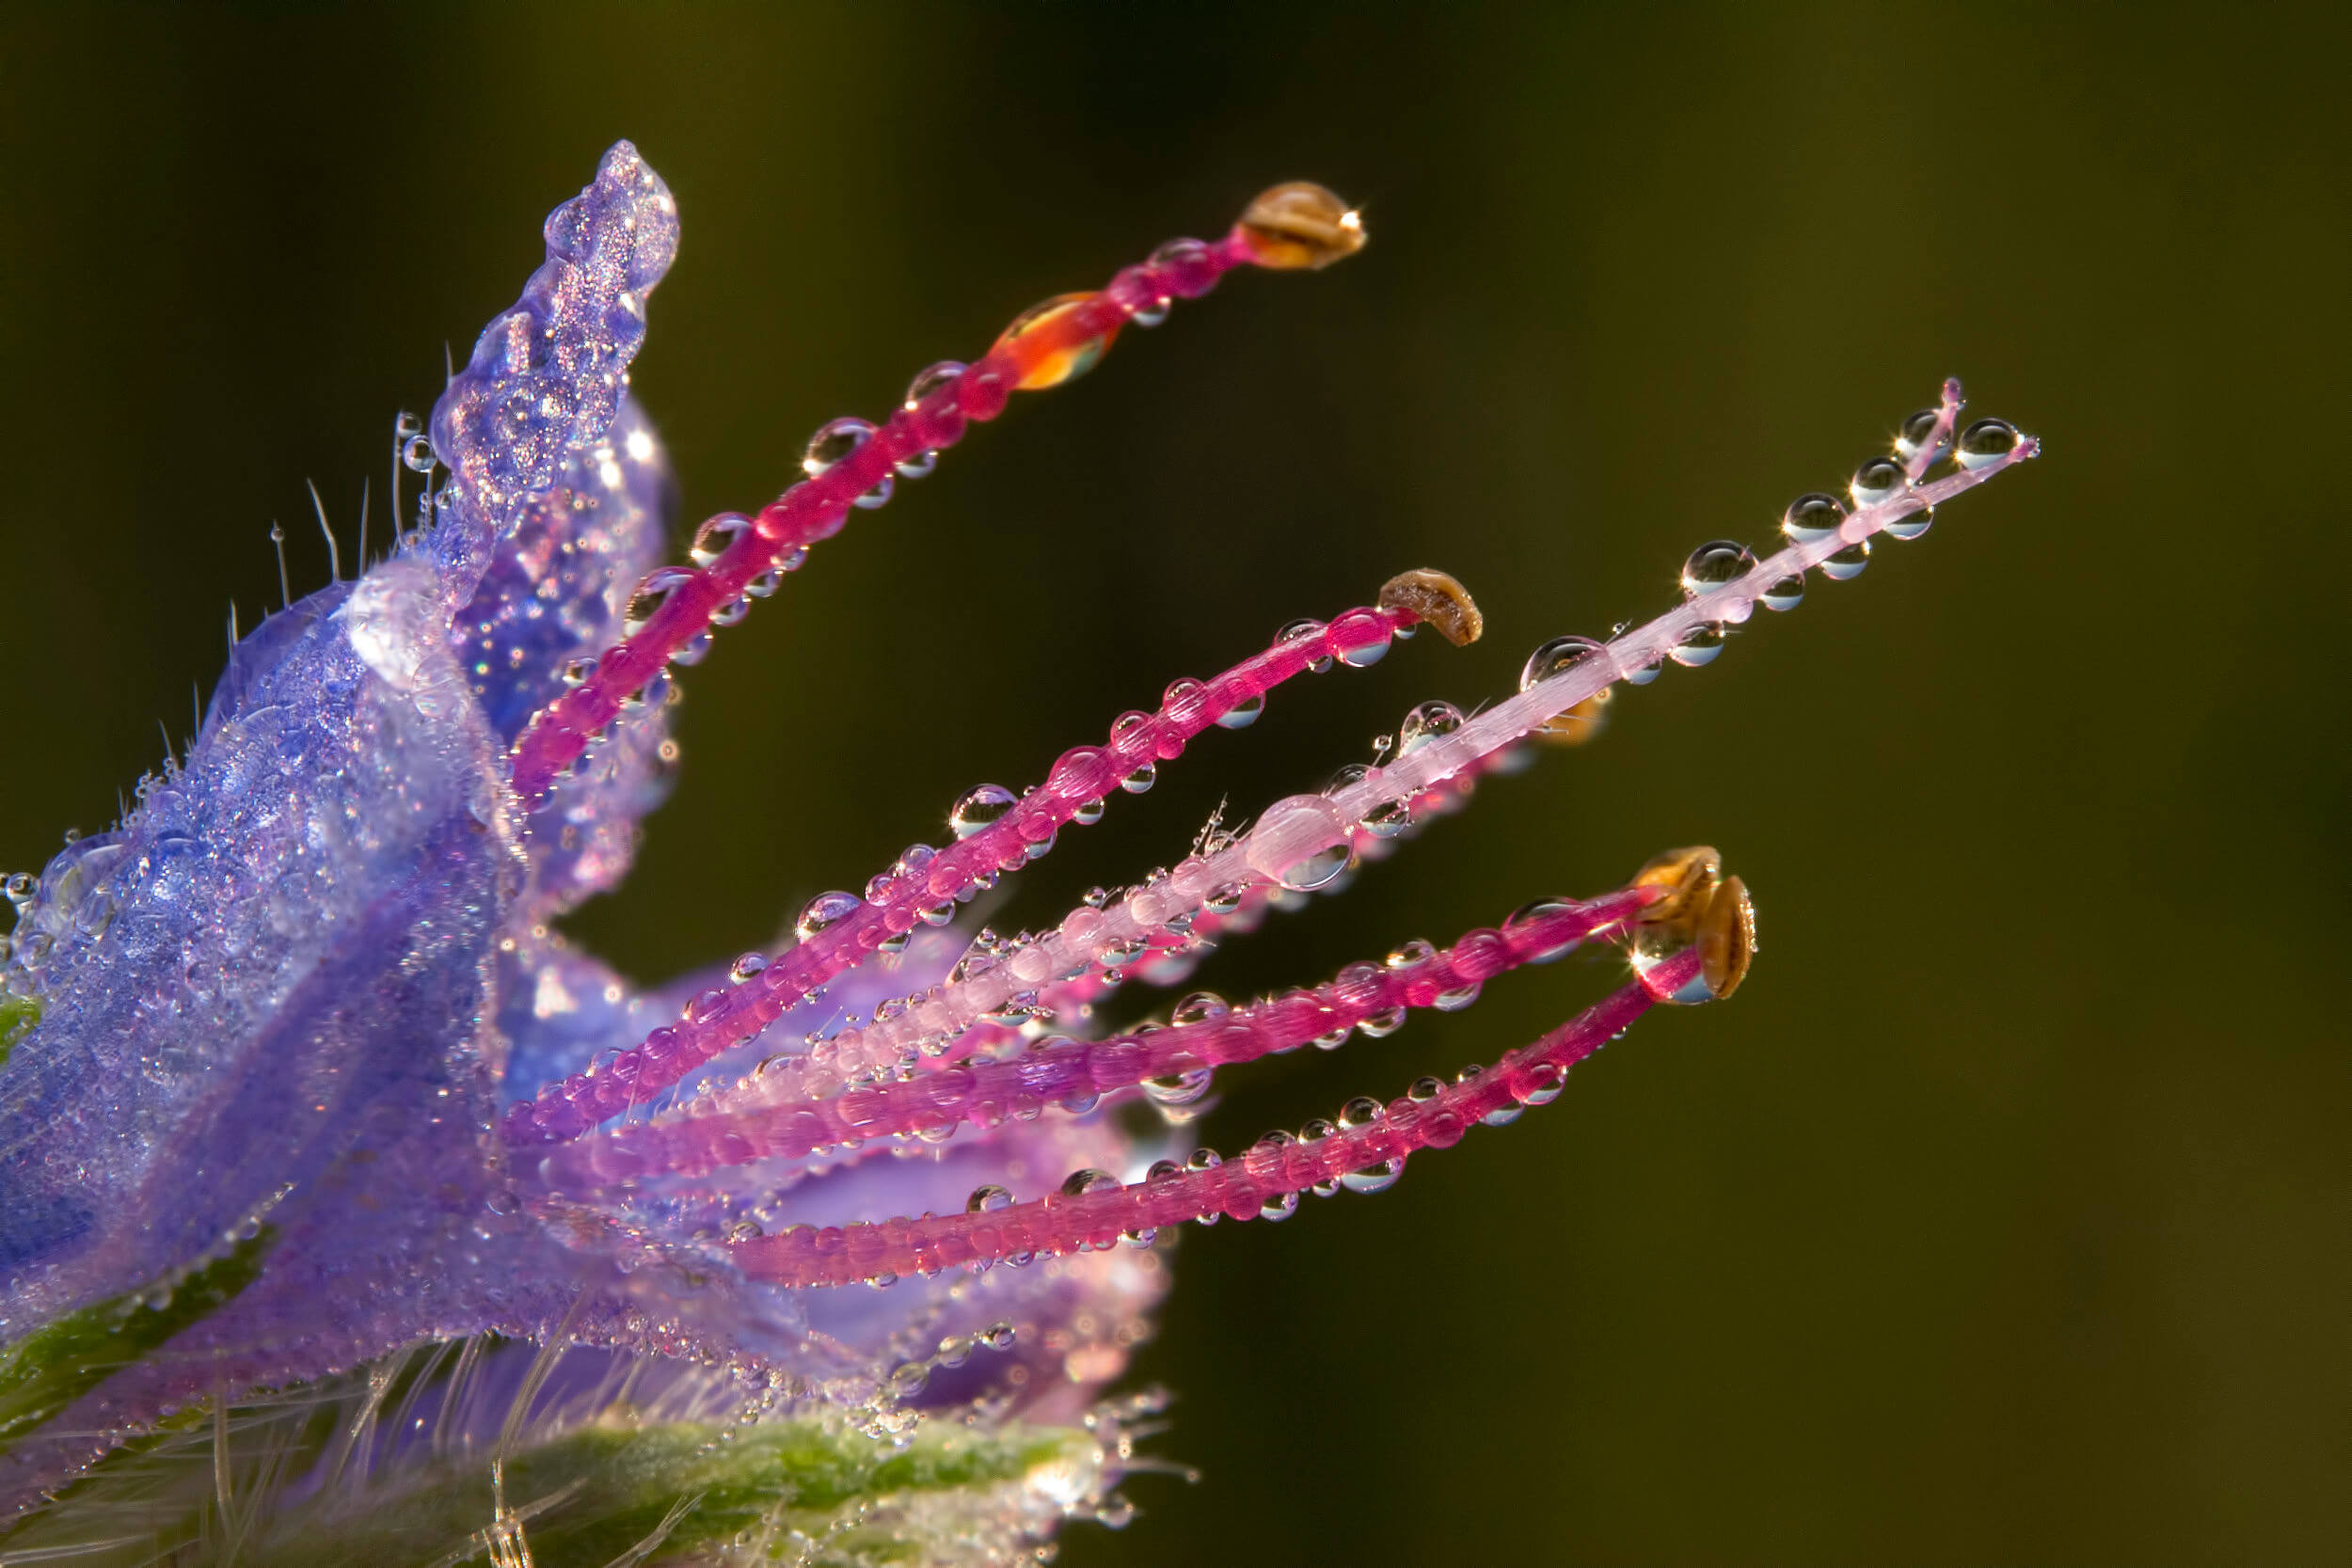 Flower with dew